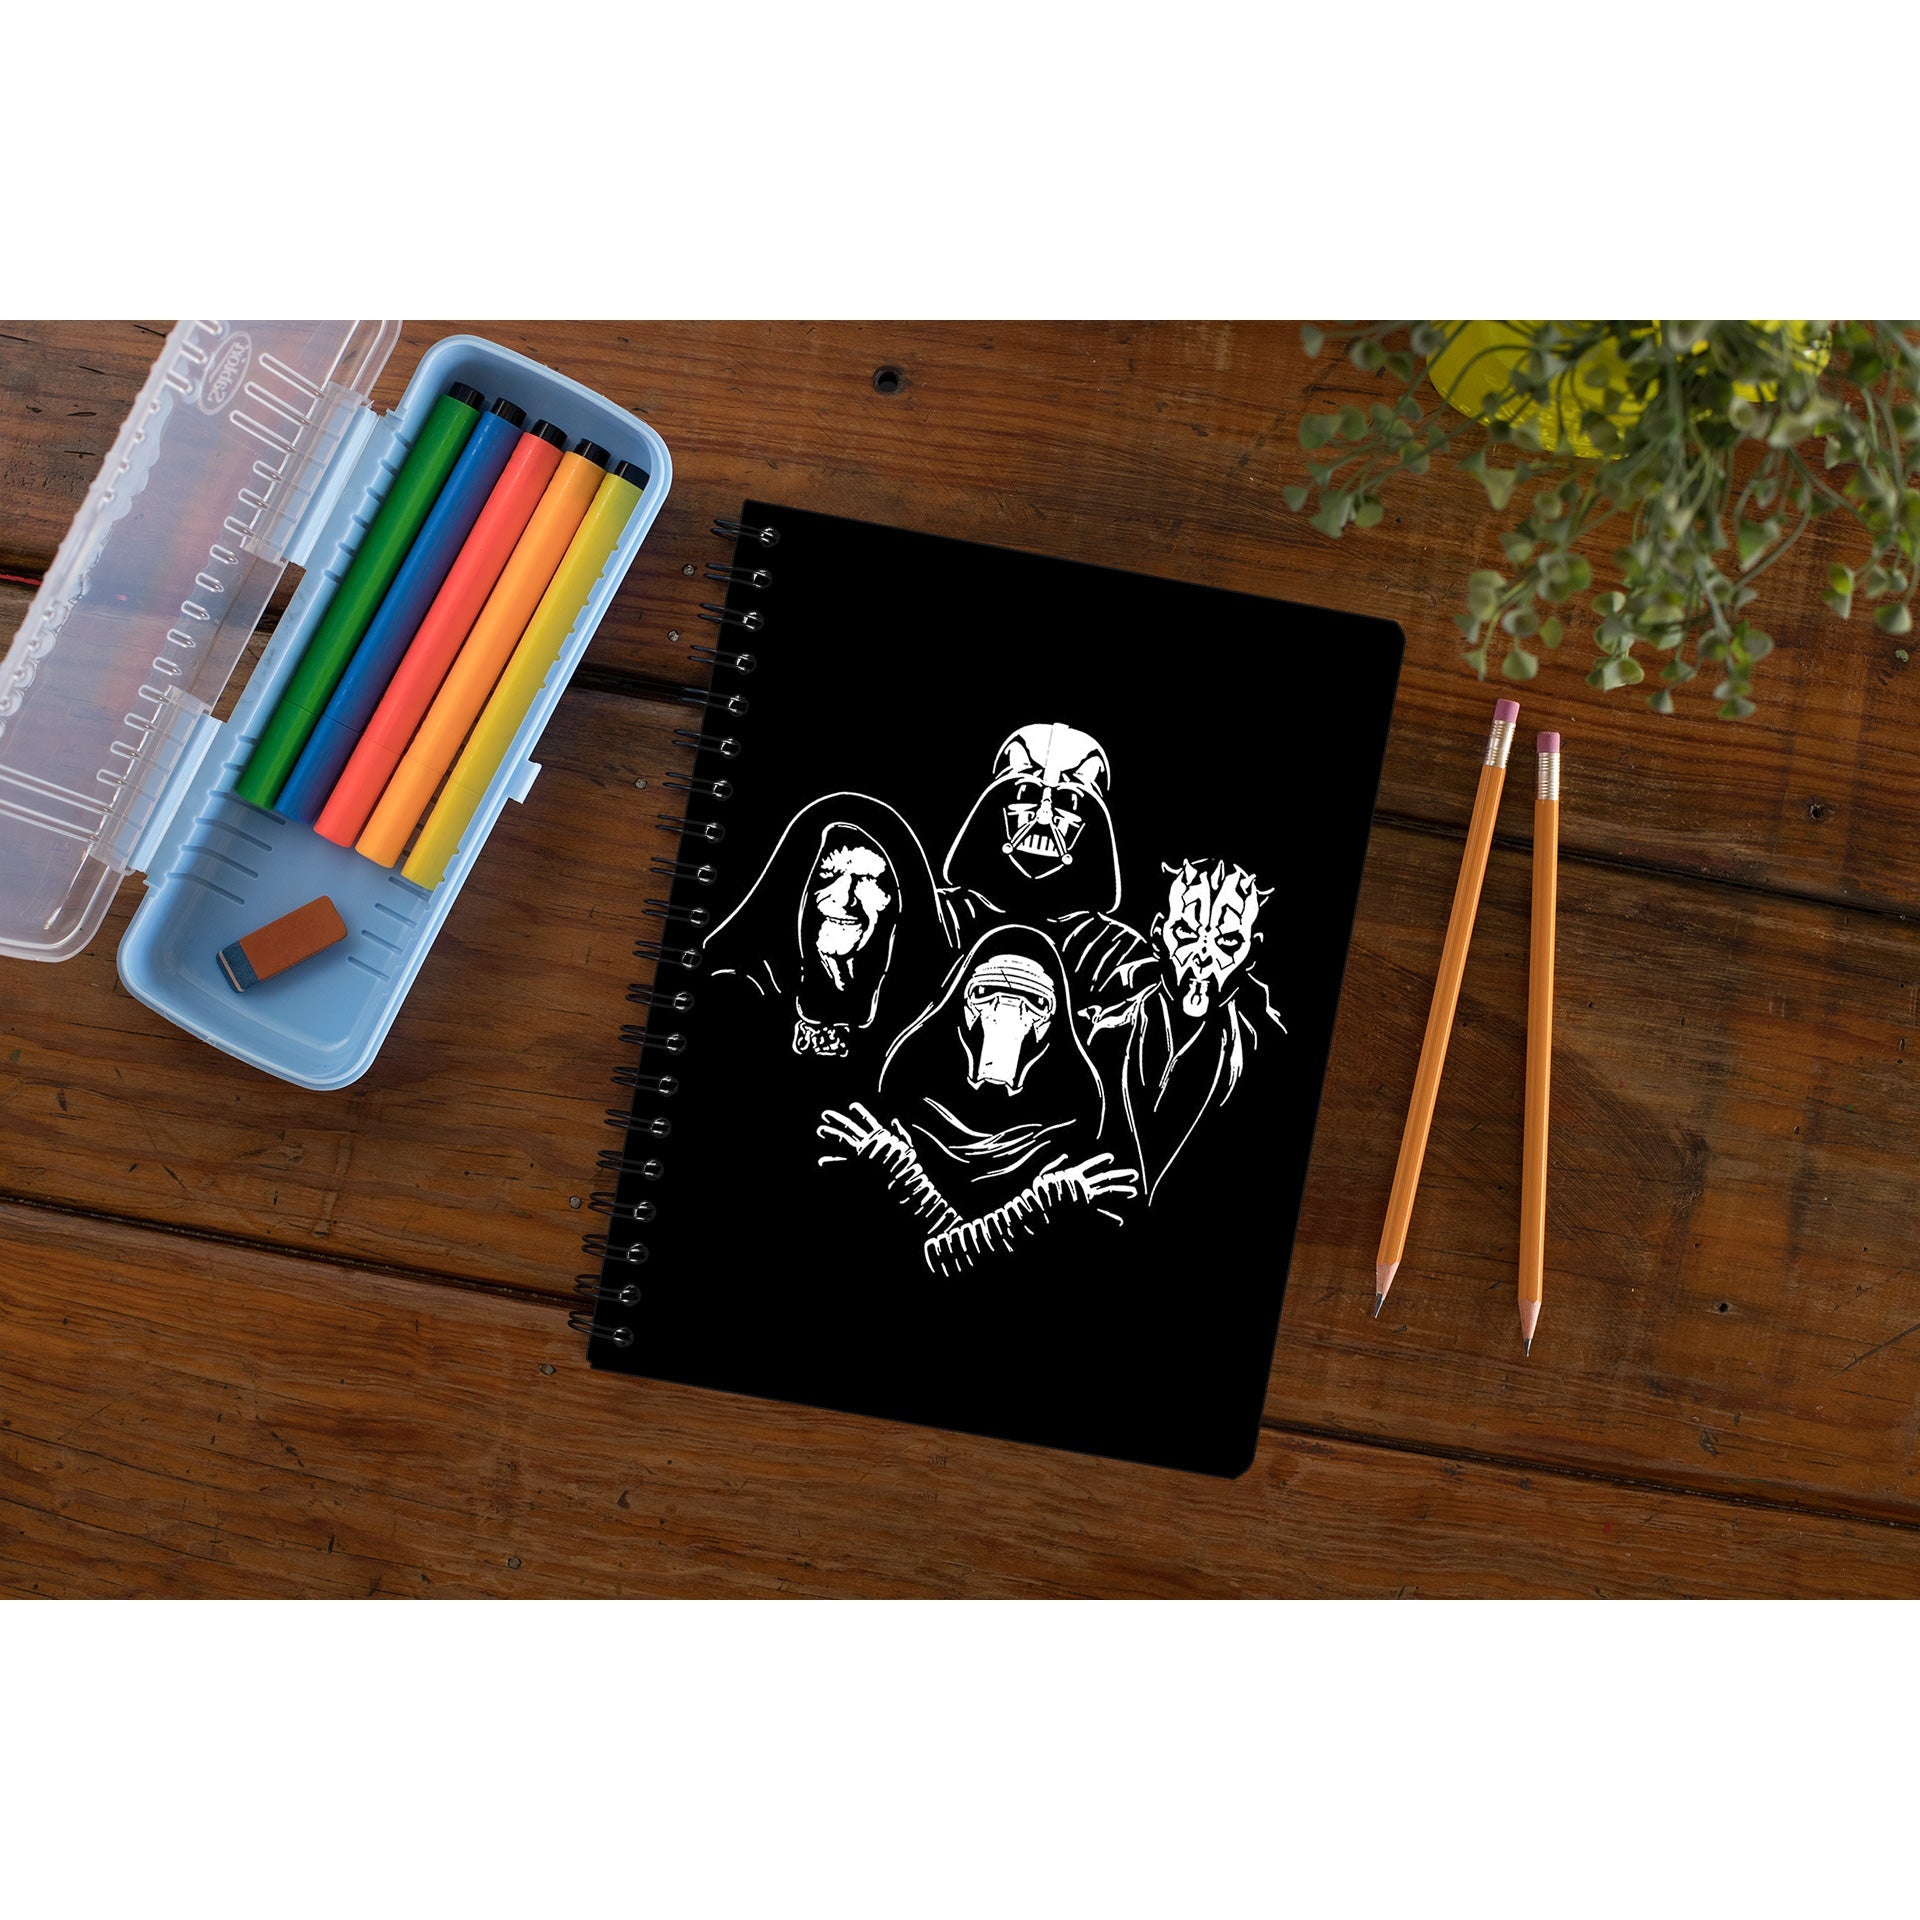 star wars darthemian rhapsody notebook notepad diary buy online india the banyan tee tbt unruled darth vader